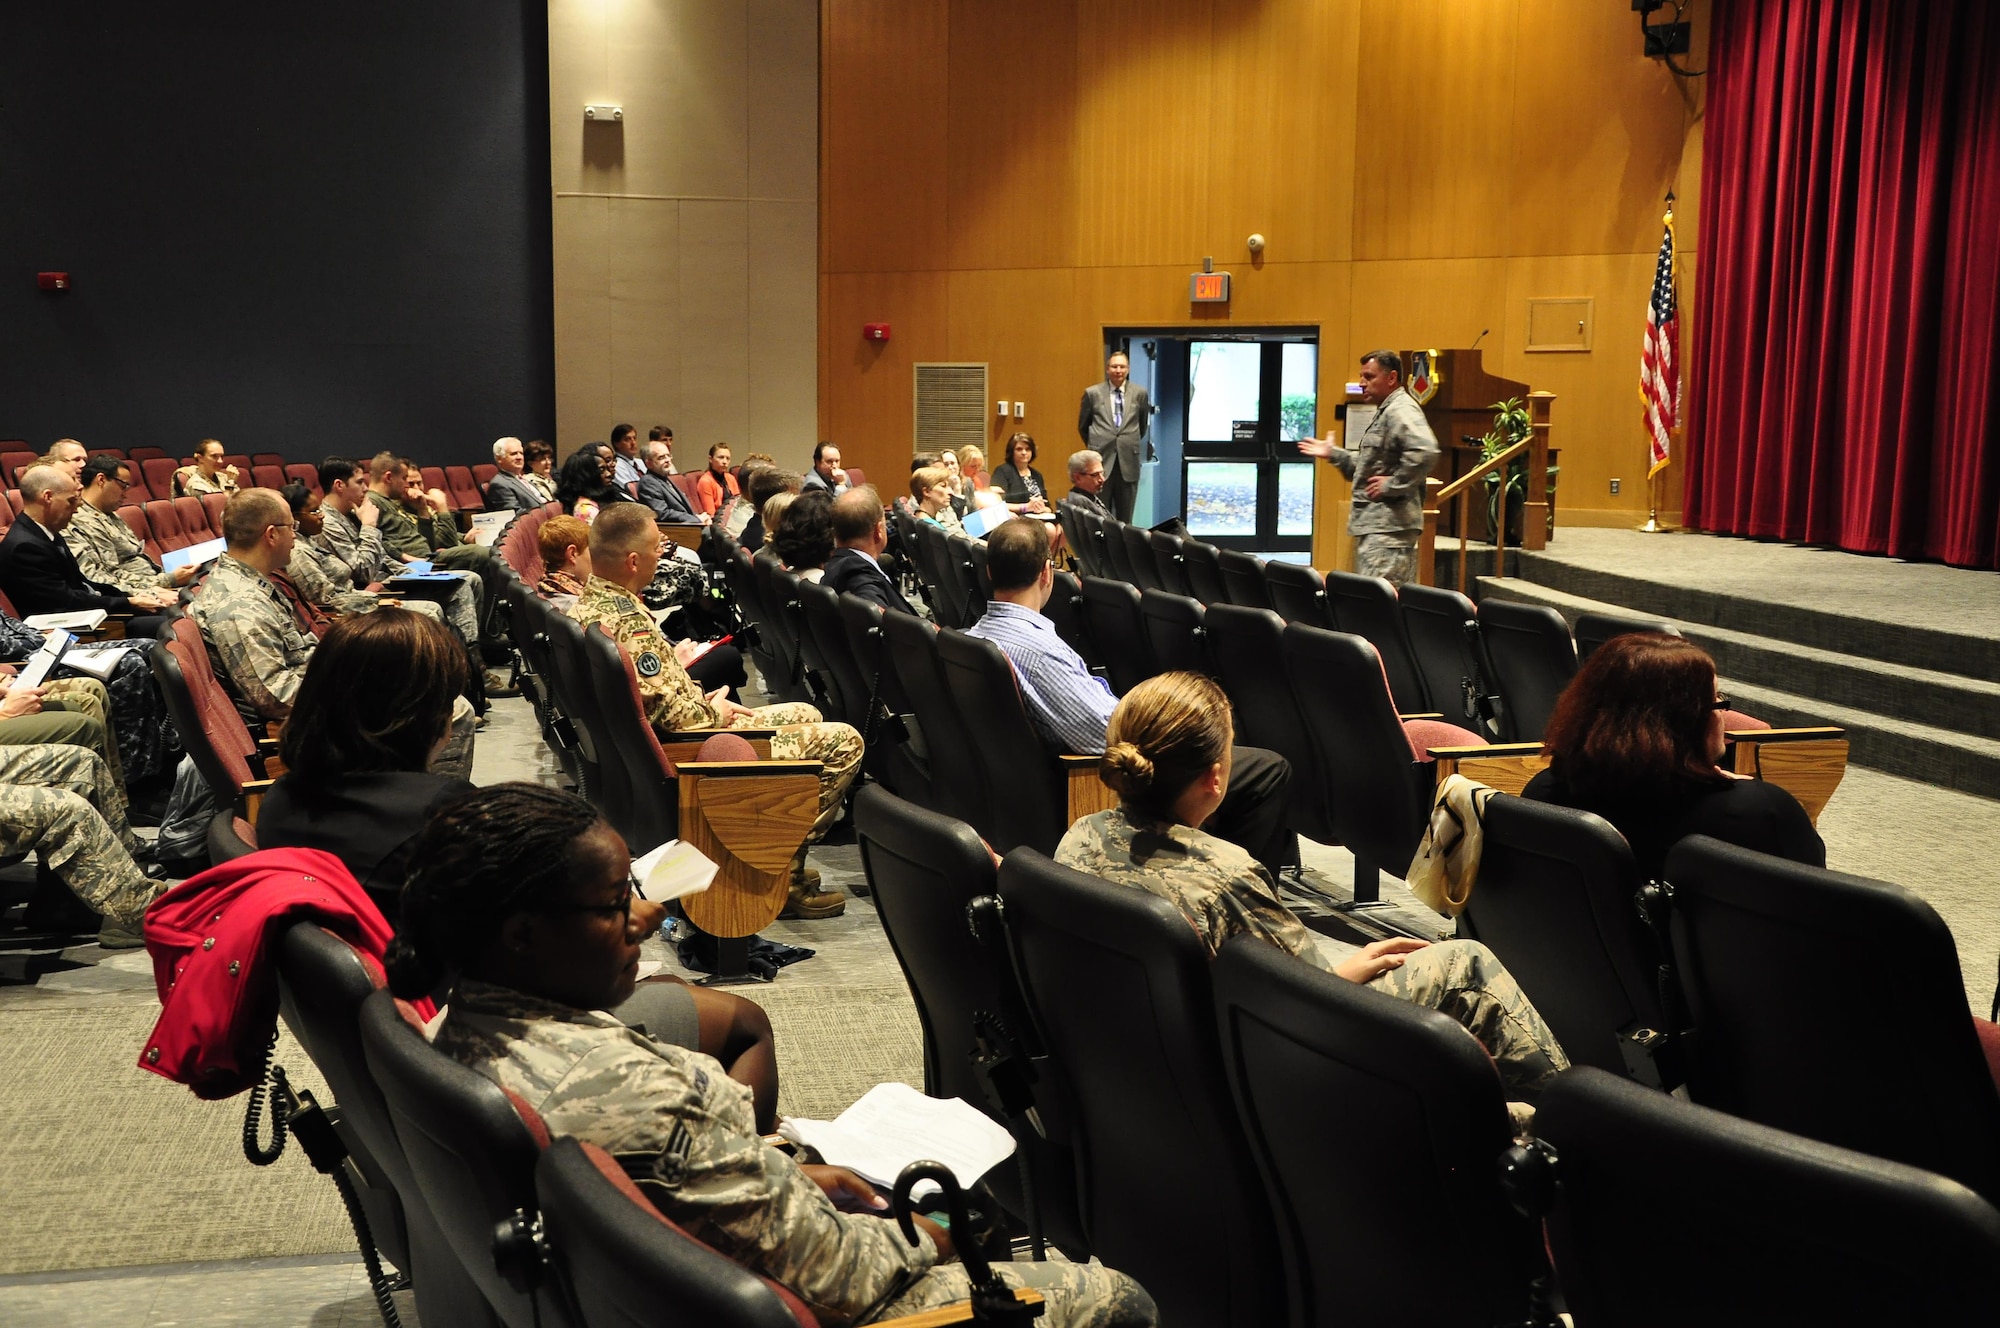 Maj. Gen. Timothy Leahy, commander of the Curtis E. LeMay Center for Doctrine Development and Education, provides opening remarks to attendees of the first Air University Language Regional Expertise and Culture Symposium at Maxwell Air Force Base, April 22, 2016. (U.S. Air Force Photo/Seth Maggard)